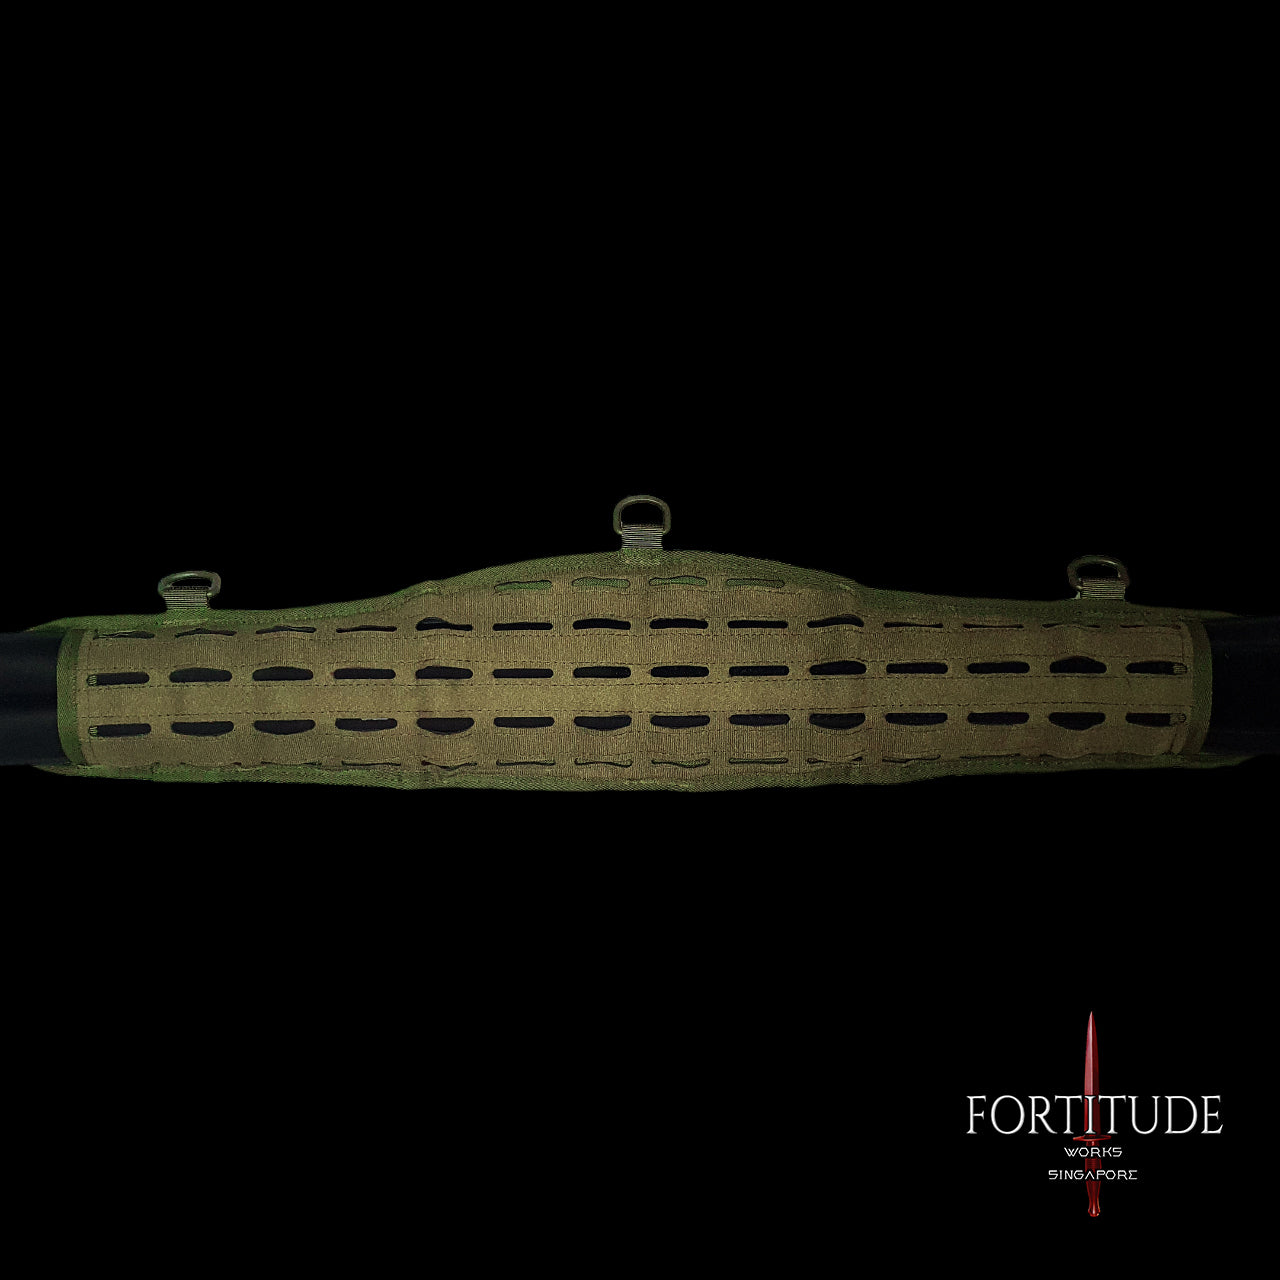 MJOLNIR WEIGHTED BELT 5KG (MWB) - FORTITUDE WORKS SINGAPORE